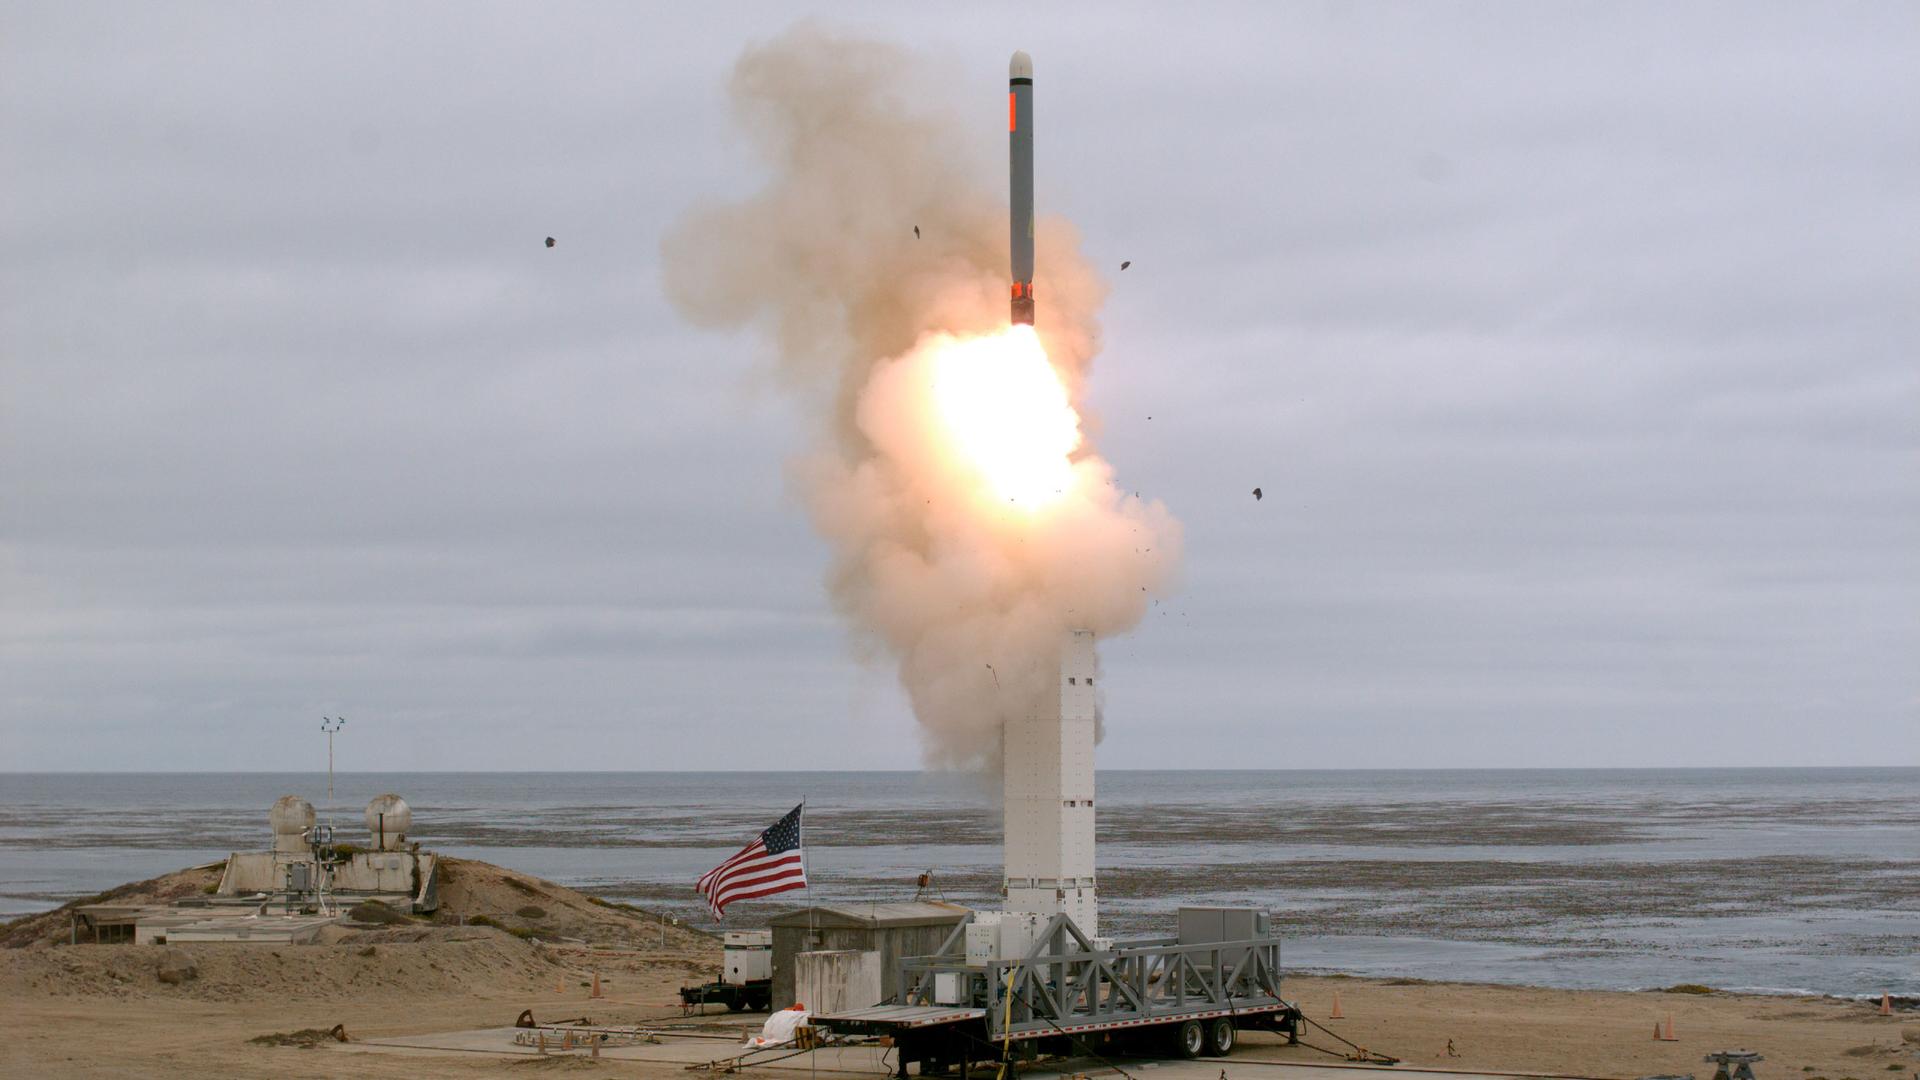 A view of a test missile launch with an American flag flying